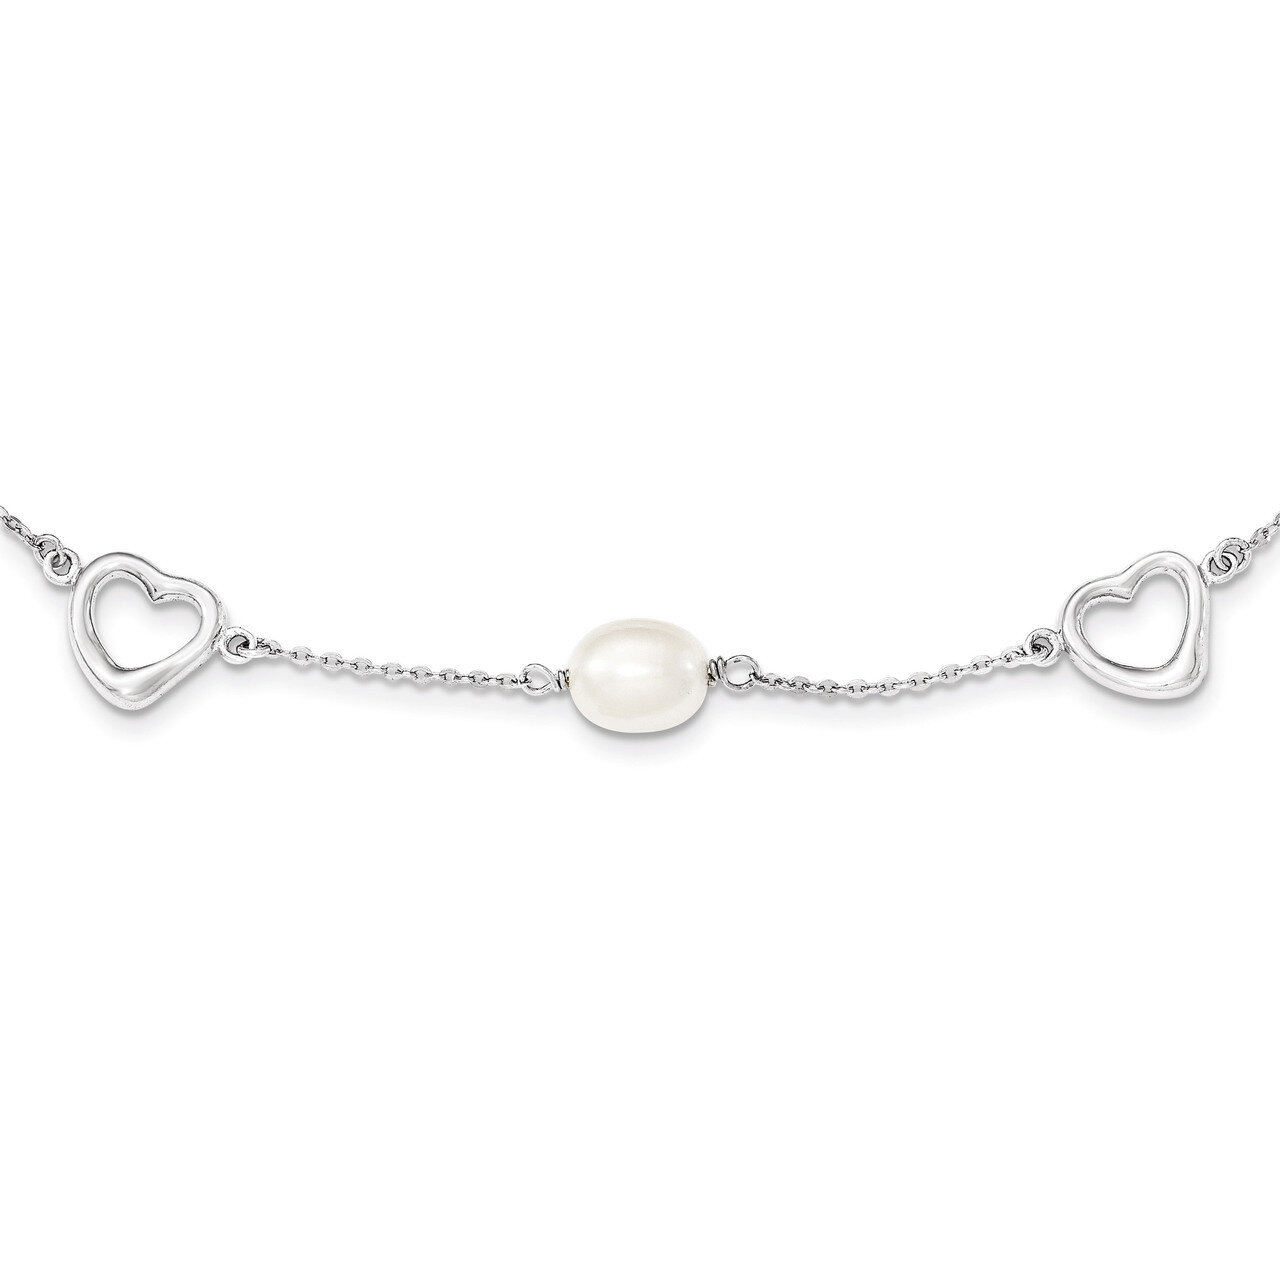 7-8mm White Cultured Pearl with 2 Inch Extender Necklace Sterling Silver QH4747-17